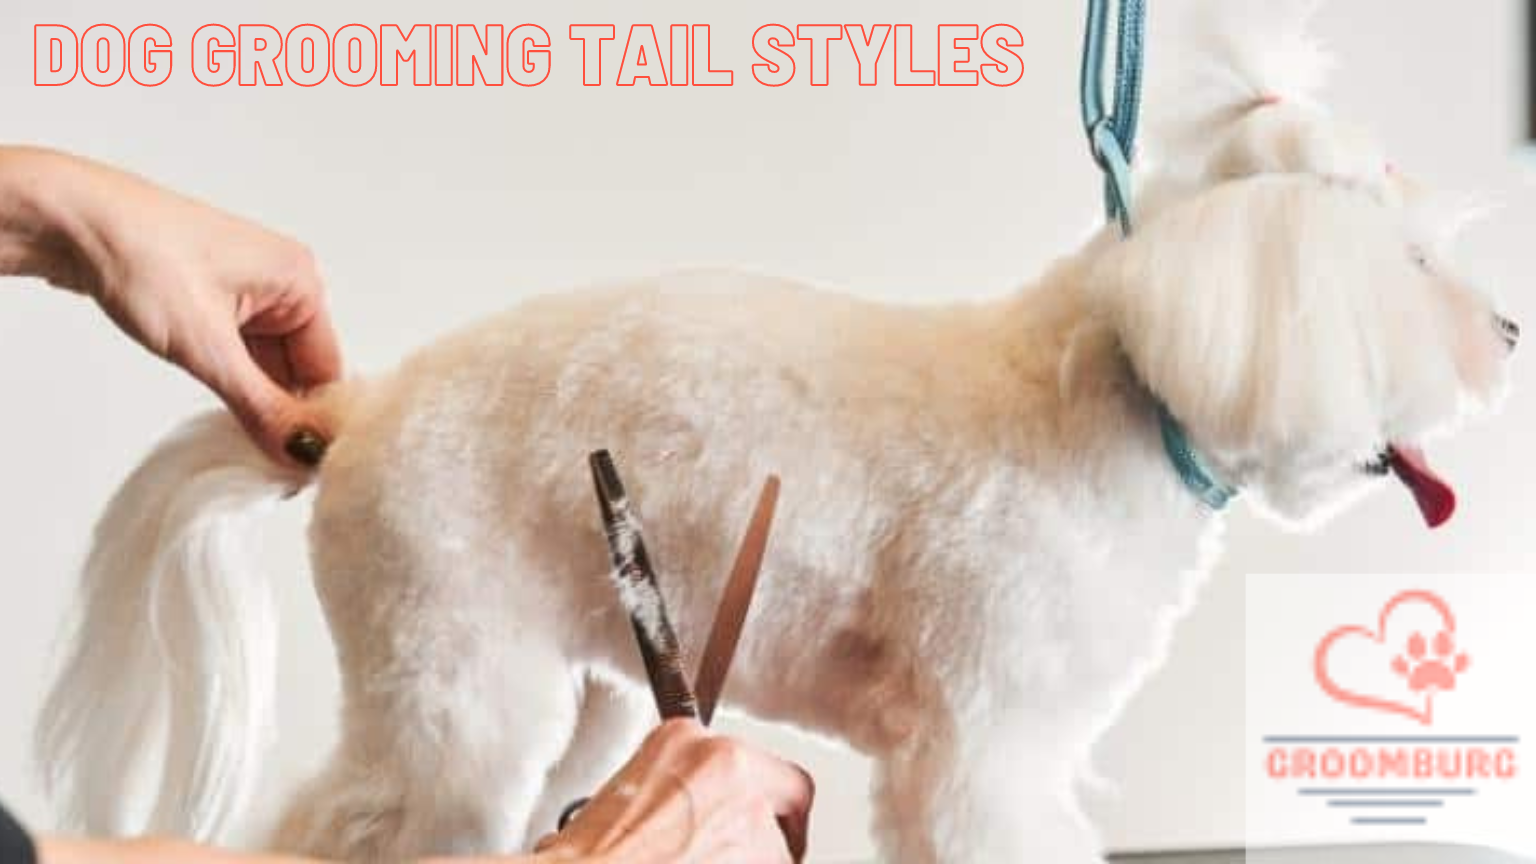 Top Trends of Dog Grooming Tail Styles – Some Unique Ideas